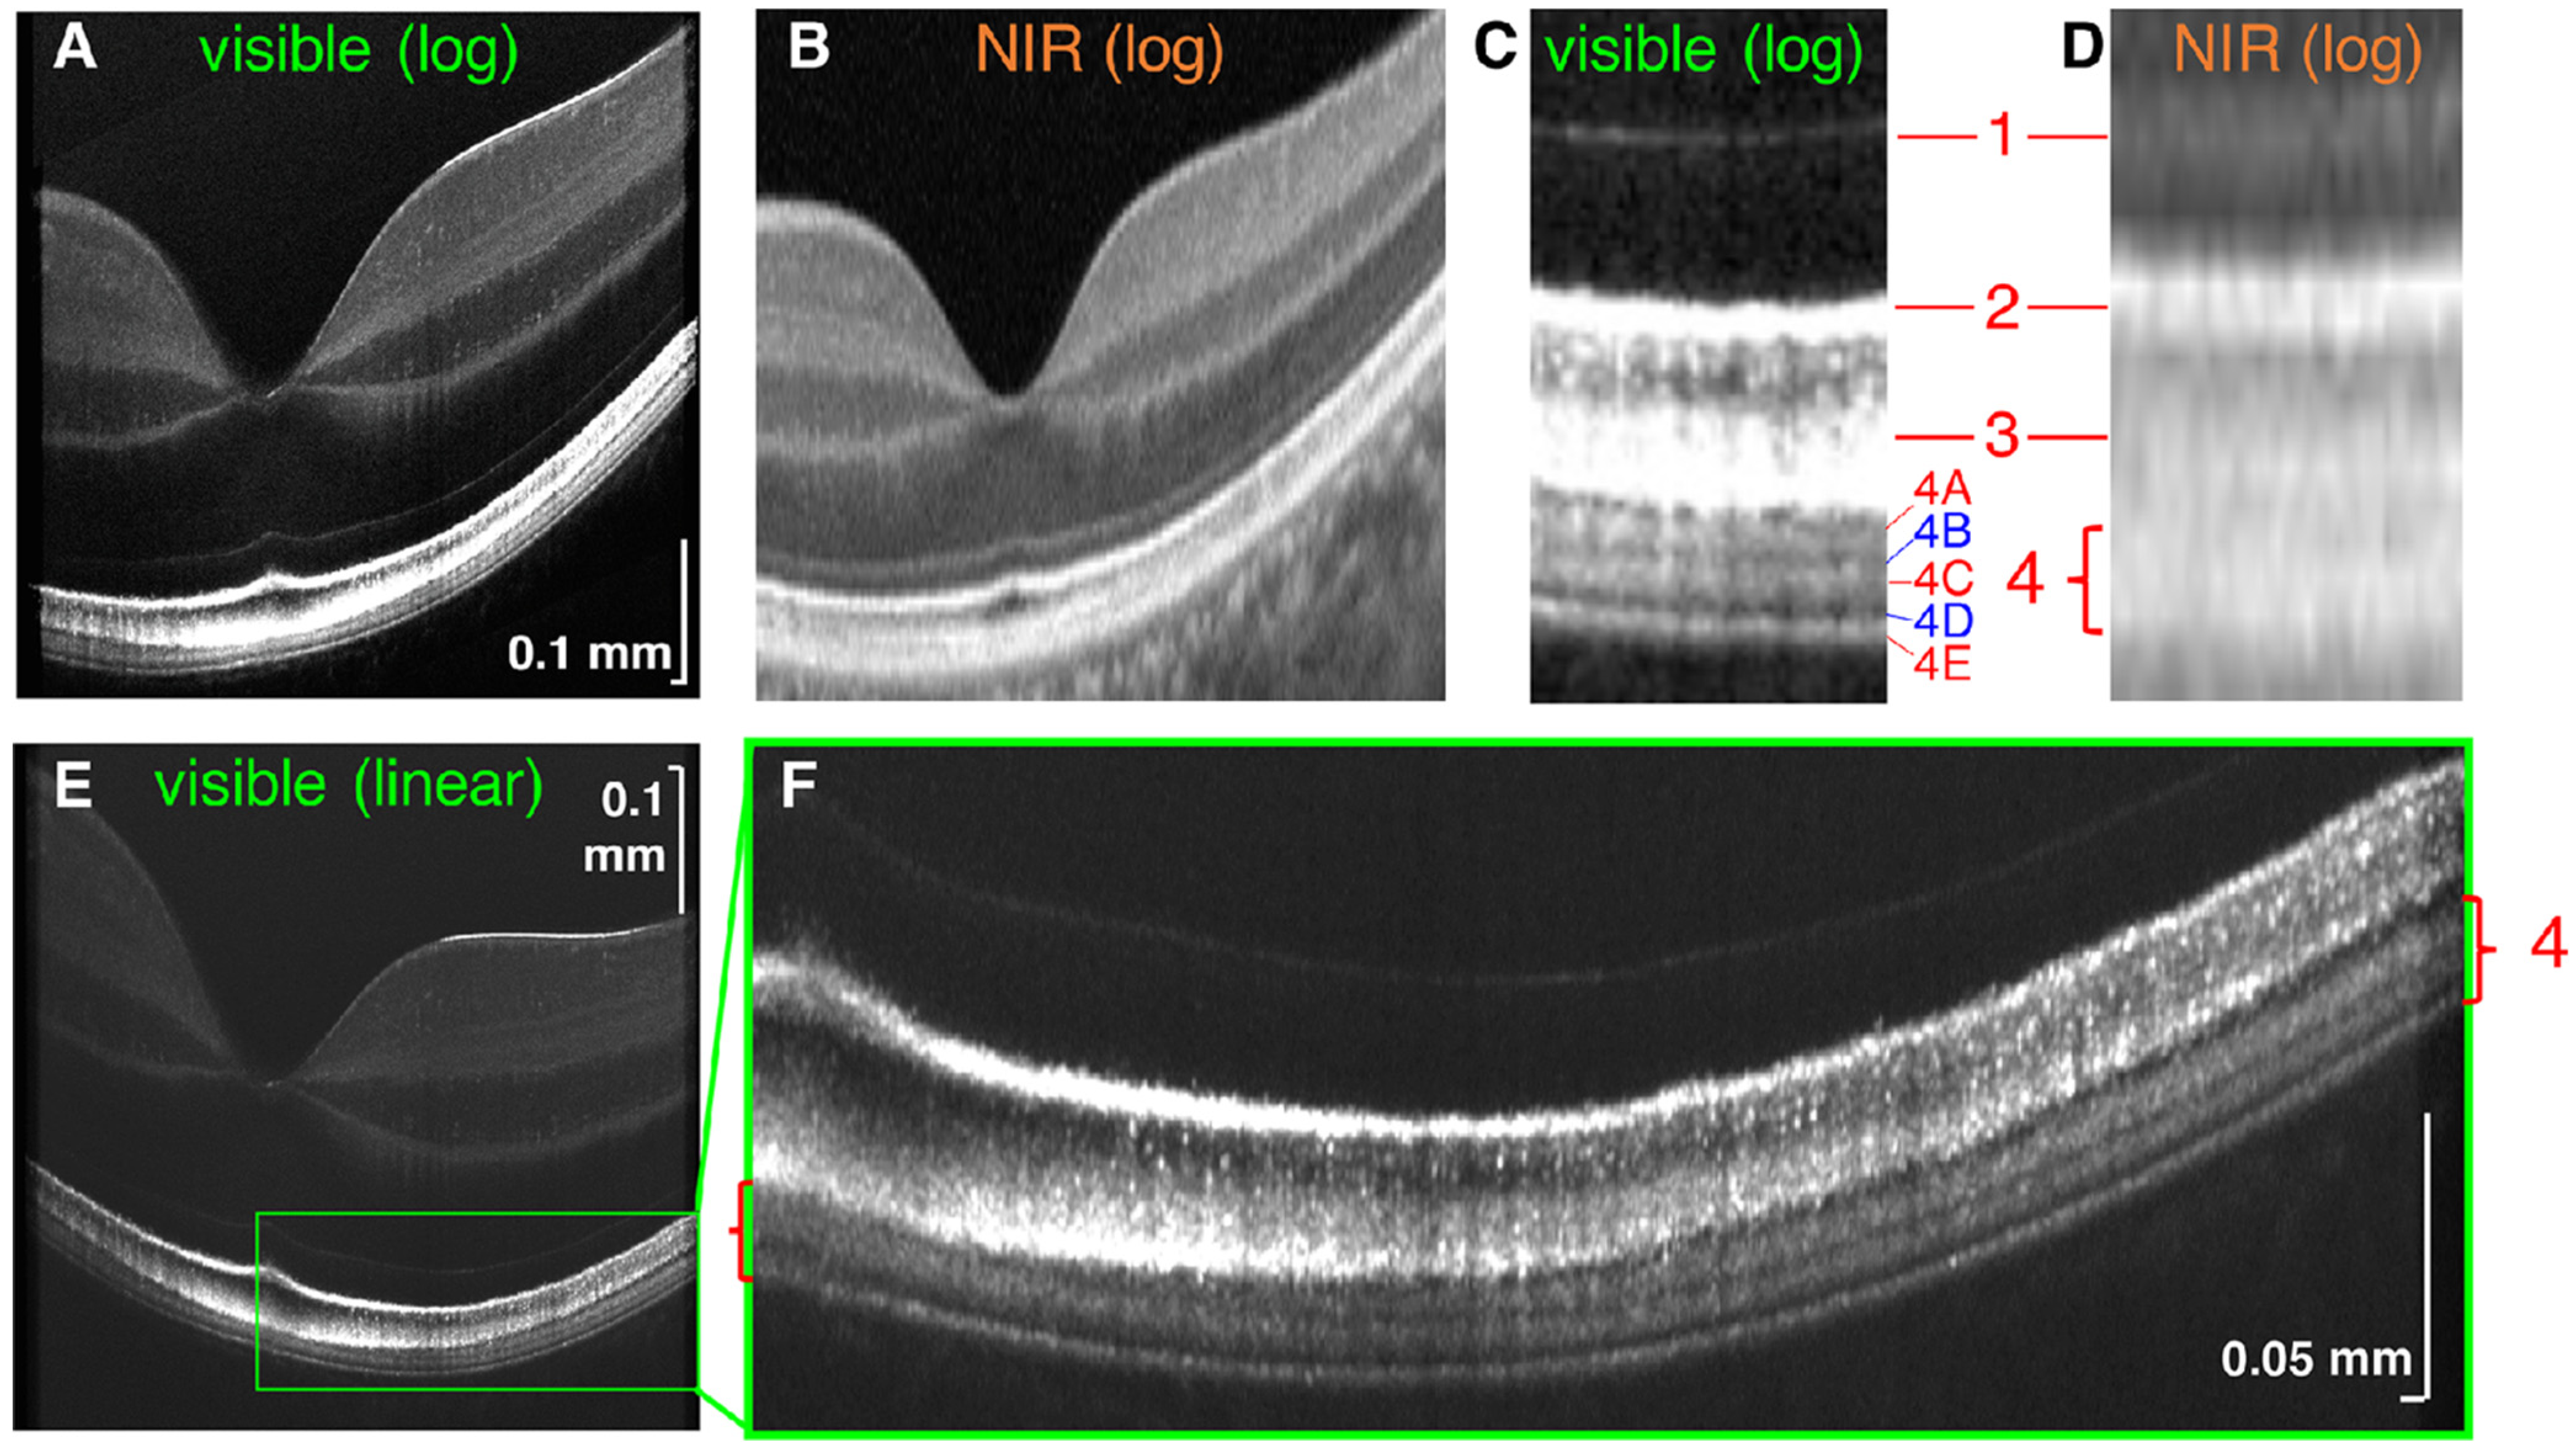 JCM | Free Full-Text | Advances in Optical Coherence Tomography Imaging  Technology and Techniques for Choroidal and Retinal Disorders | HTML